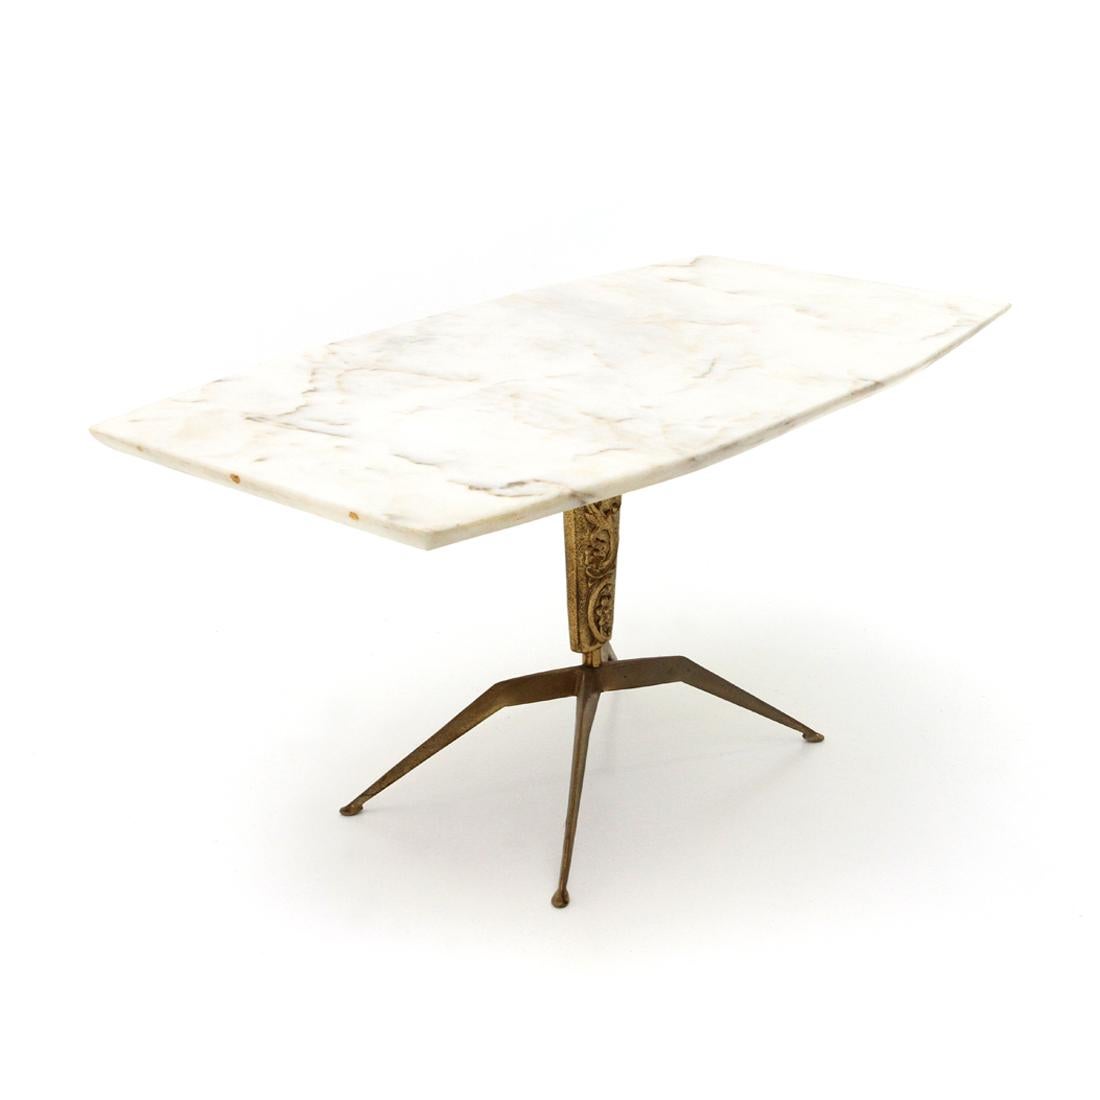 Italian manufacturing table from the 1950s.
Marble-top with tapered edge.
Brass base with decorative pattern.
Good general conditions, some signs due to normal use over time.

Dimensions: Length 87 cm, depth 48 cm, height 43 cm.